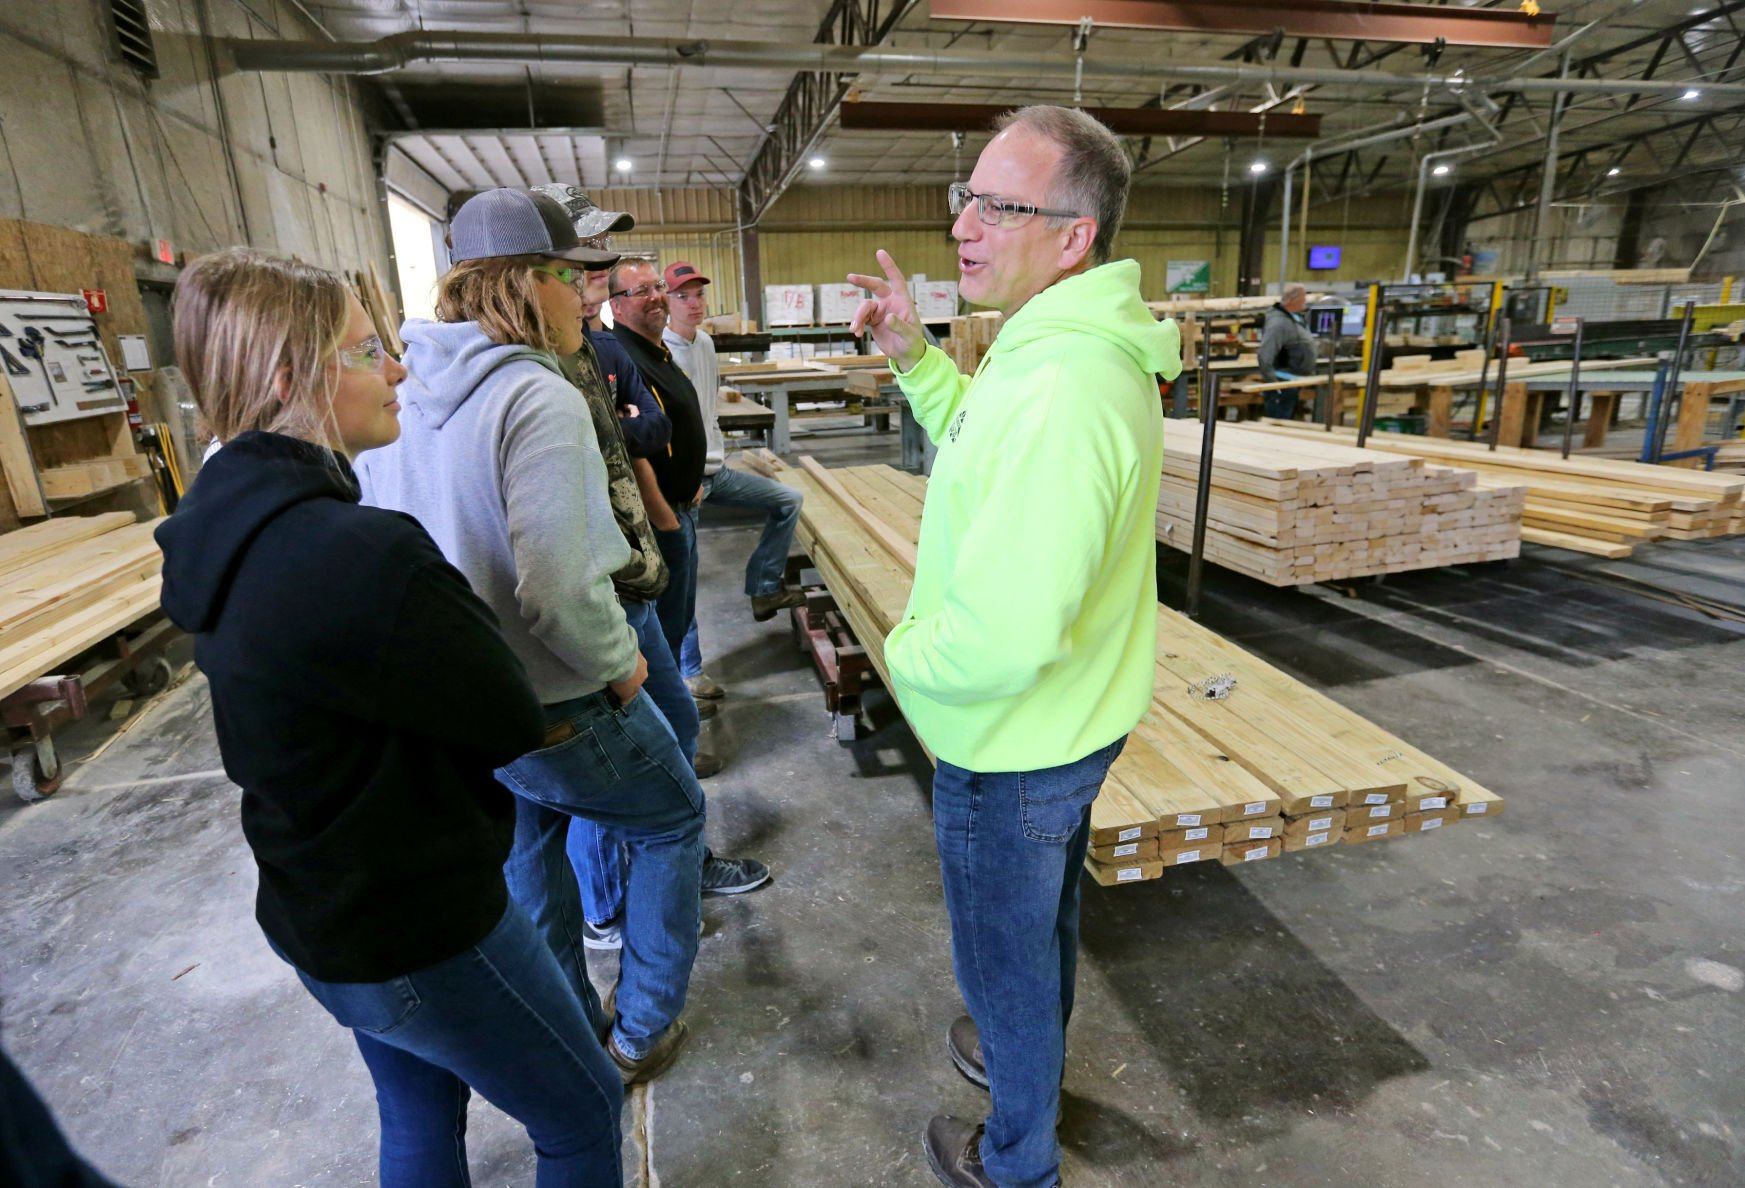 Junior Lainey Knipper (left) and other Maquoketa Valley High School students listen to Bob Stewart, operations manager at Lumber Specialties, during a tour of the facility in Dyersville, Iowa, on Thursday, Oct. 6, 2022, as part of Manufacturing Day sponsored by Dyersville Economic Development.    PHOTO CREDIT: JESSICA REILLY